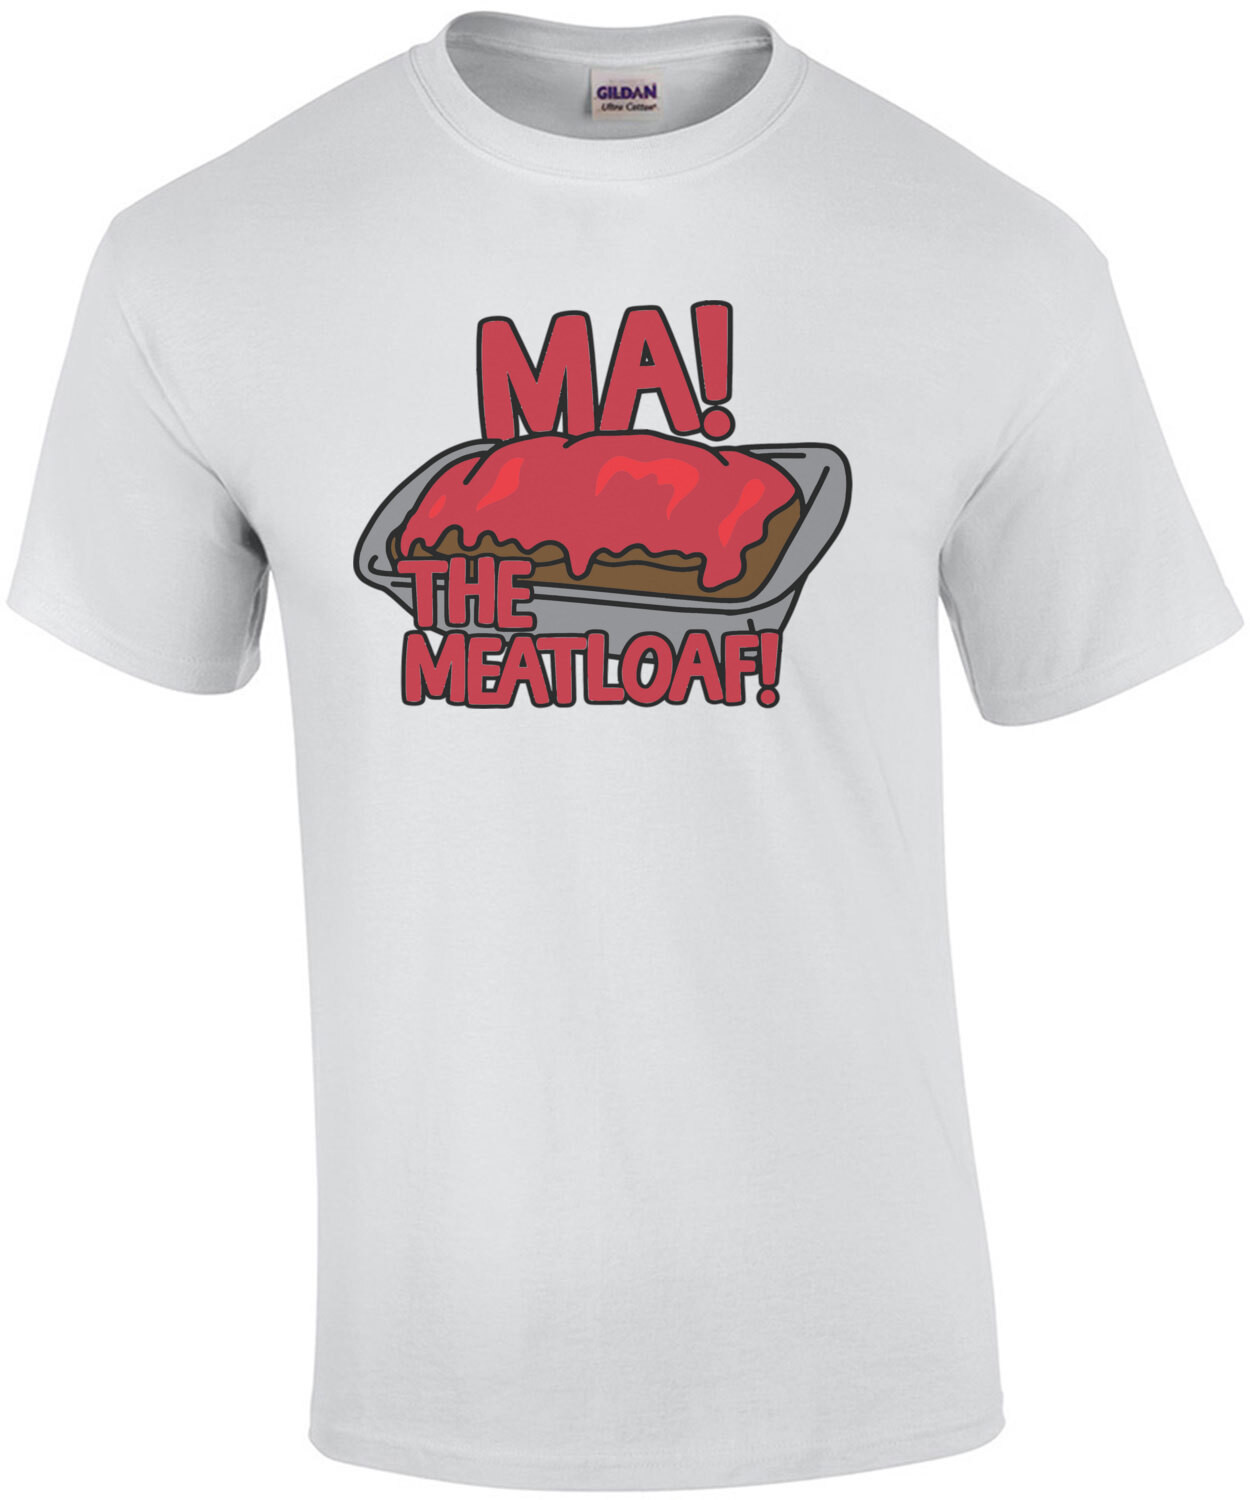 Ma! The Meatloaf! T-Shirt - Inspired by the movie The Wedding Crashers